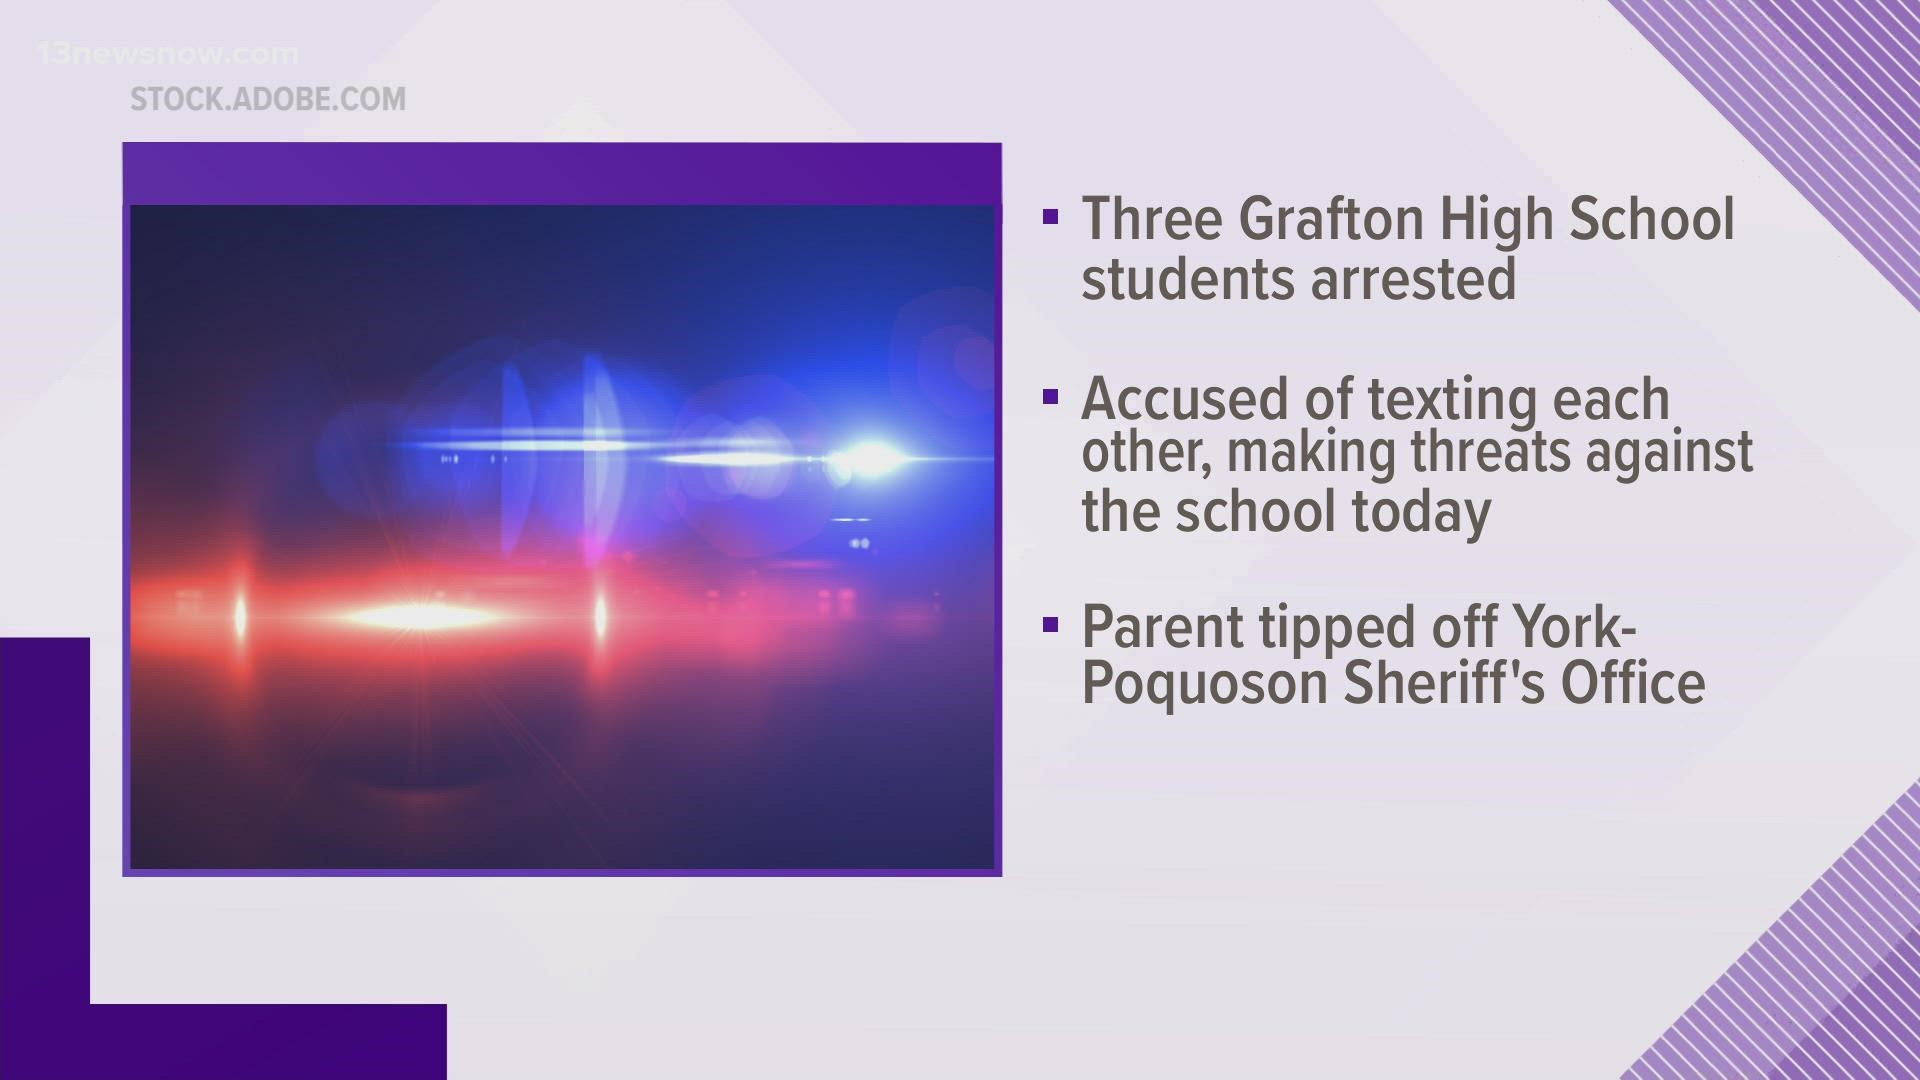 On Tuesday night, deputies got a report of text messages between three students at Grafton High about shooting, bombing and burning the school.